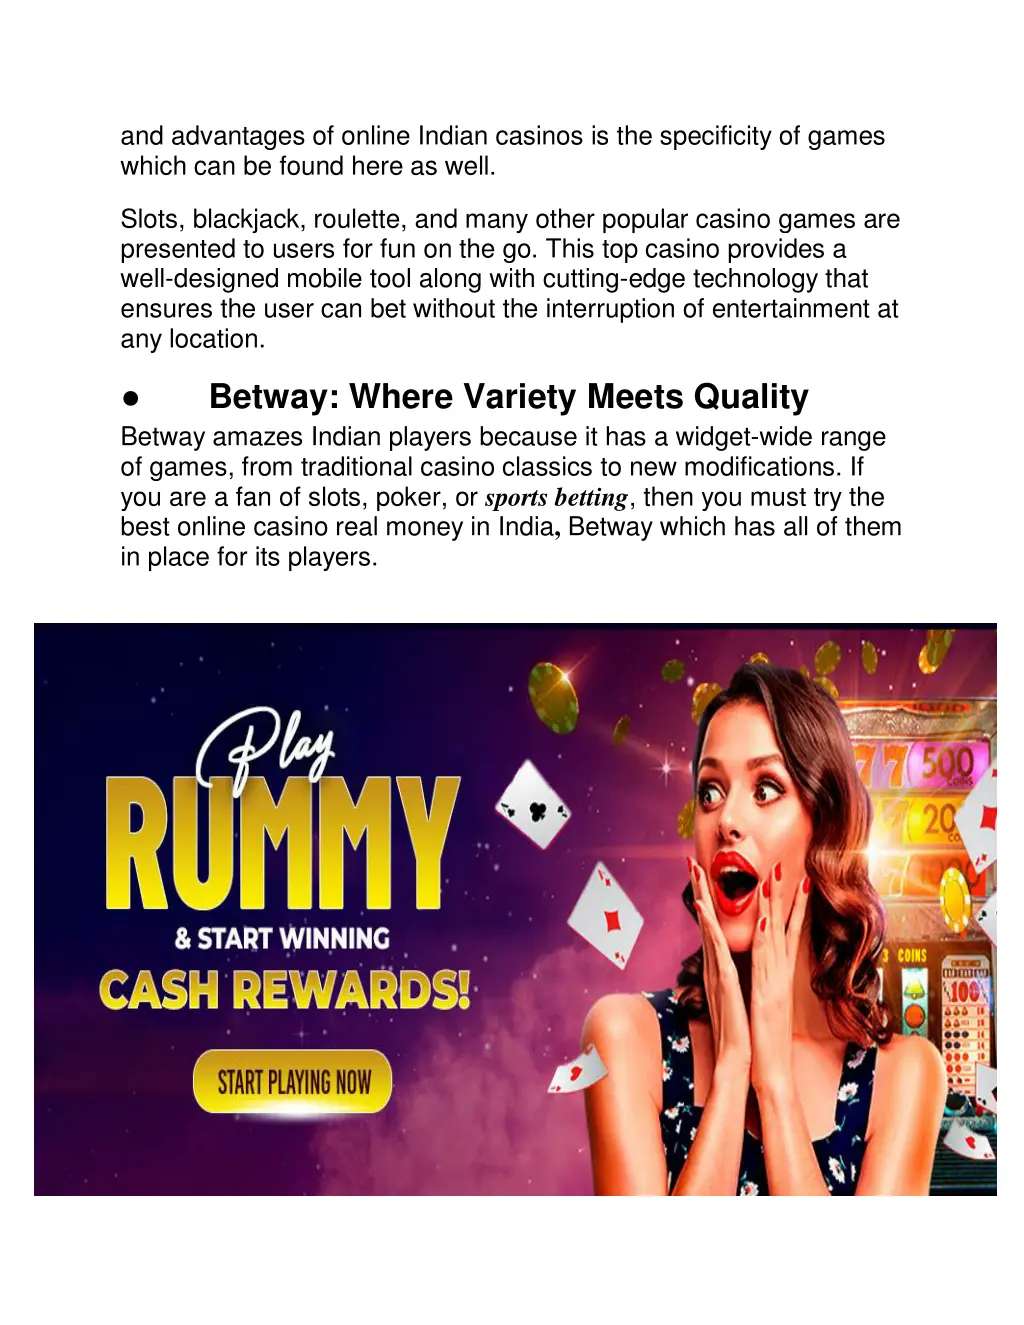 and advantages of online indian casinos